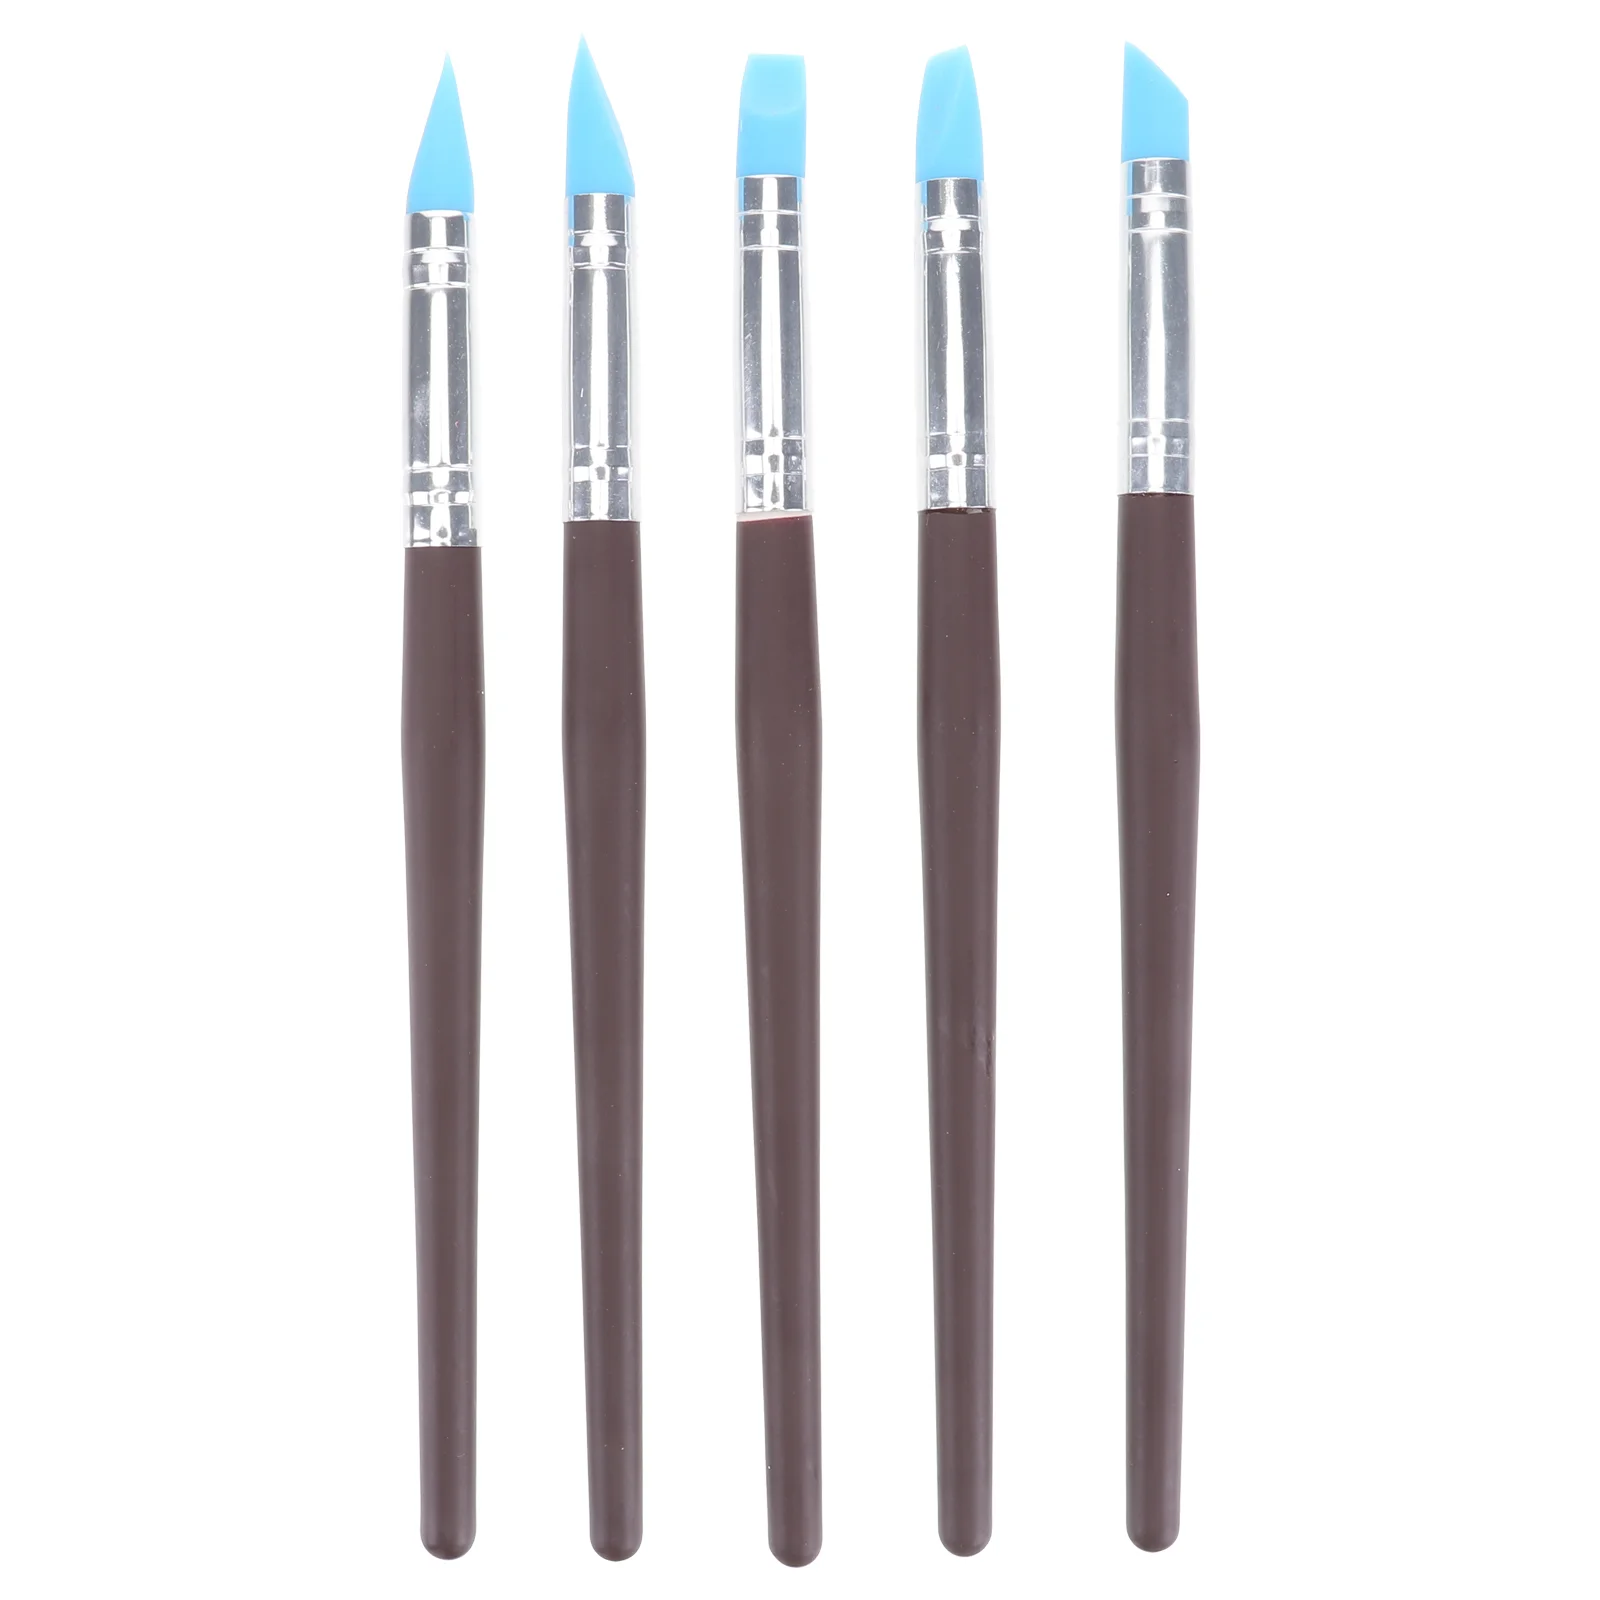 

Tools Clay Cake Sculpting Brush Modeling Brushes Fondant Decorating Pottery Cookie Decoration Set Silicone Tool Carving Kit Air